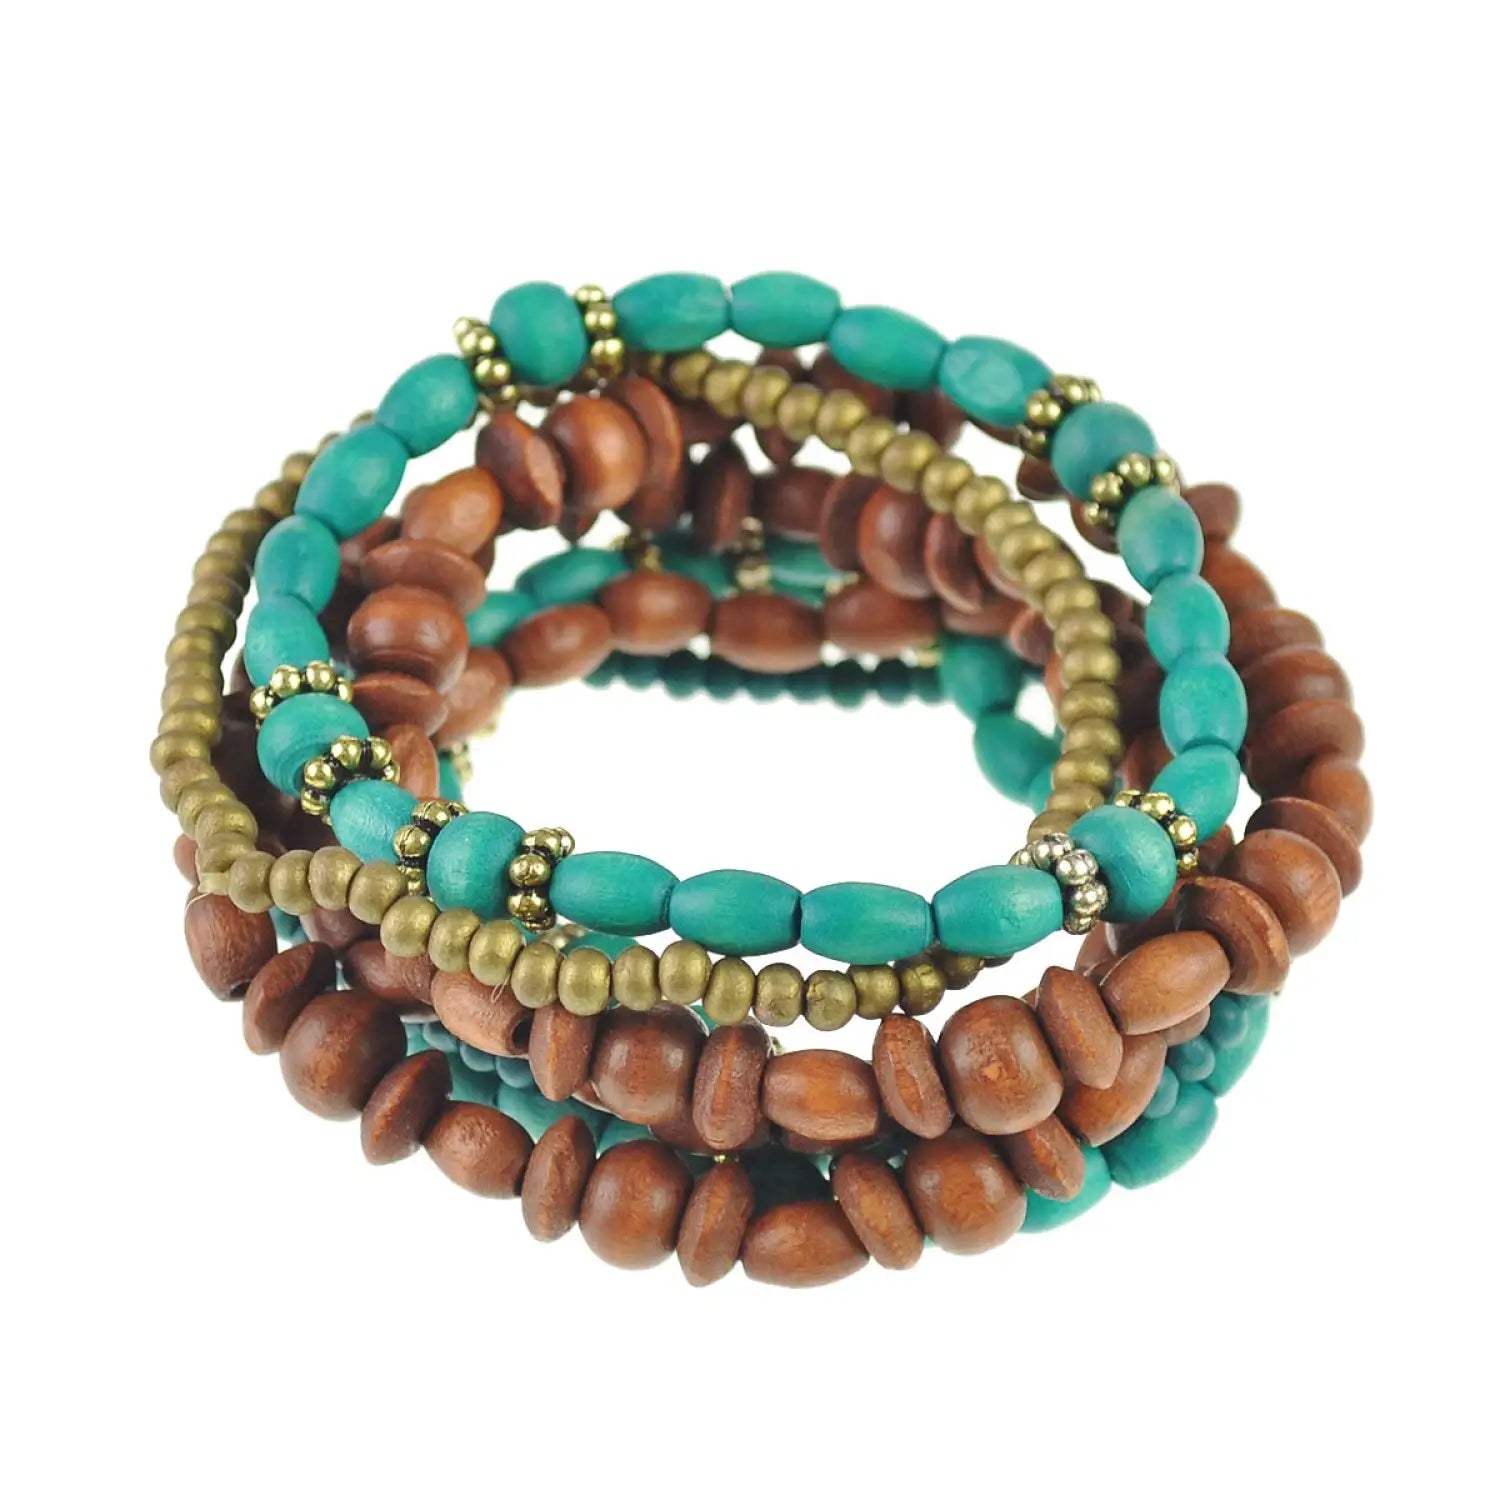 Boho turquoise beads multi-layered bracelet with brown beads